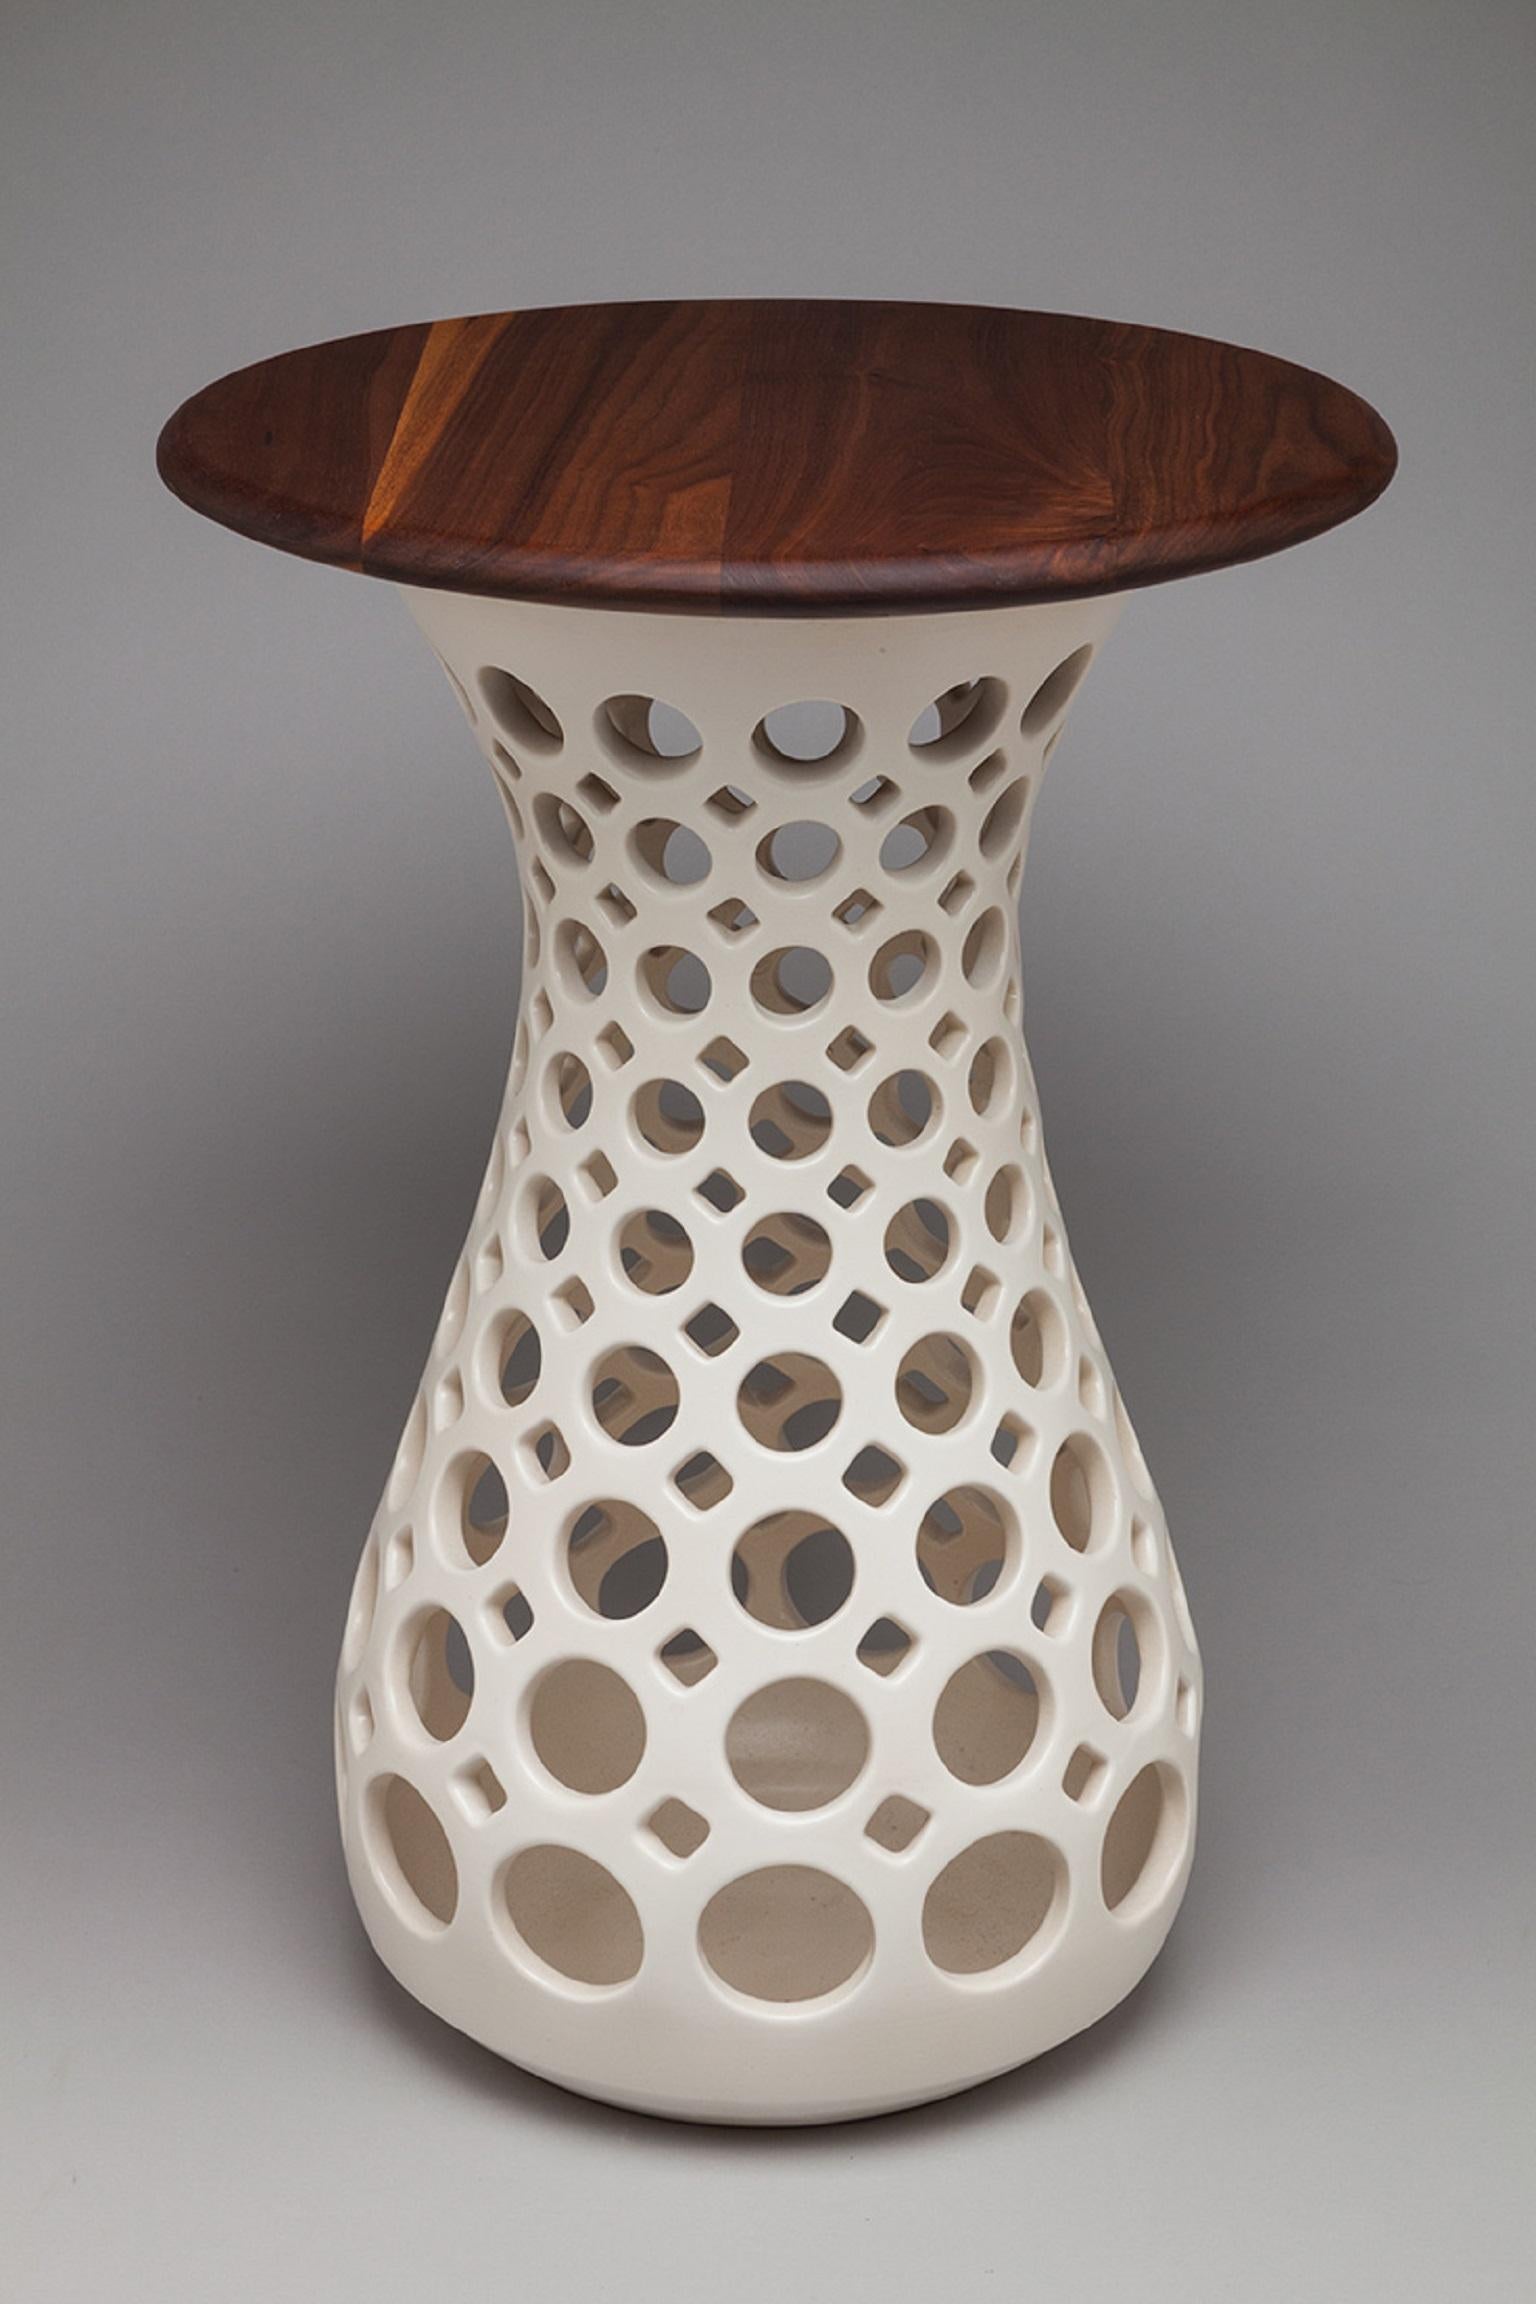 This ceramic side table is thrown on a potter's wheel and then hand pierced. It is fired with a white satin glaze that is luxury to the touch. The finished walnut table top is a separate piece that fits into the base with a lip underneath to help